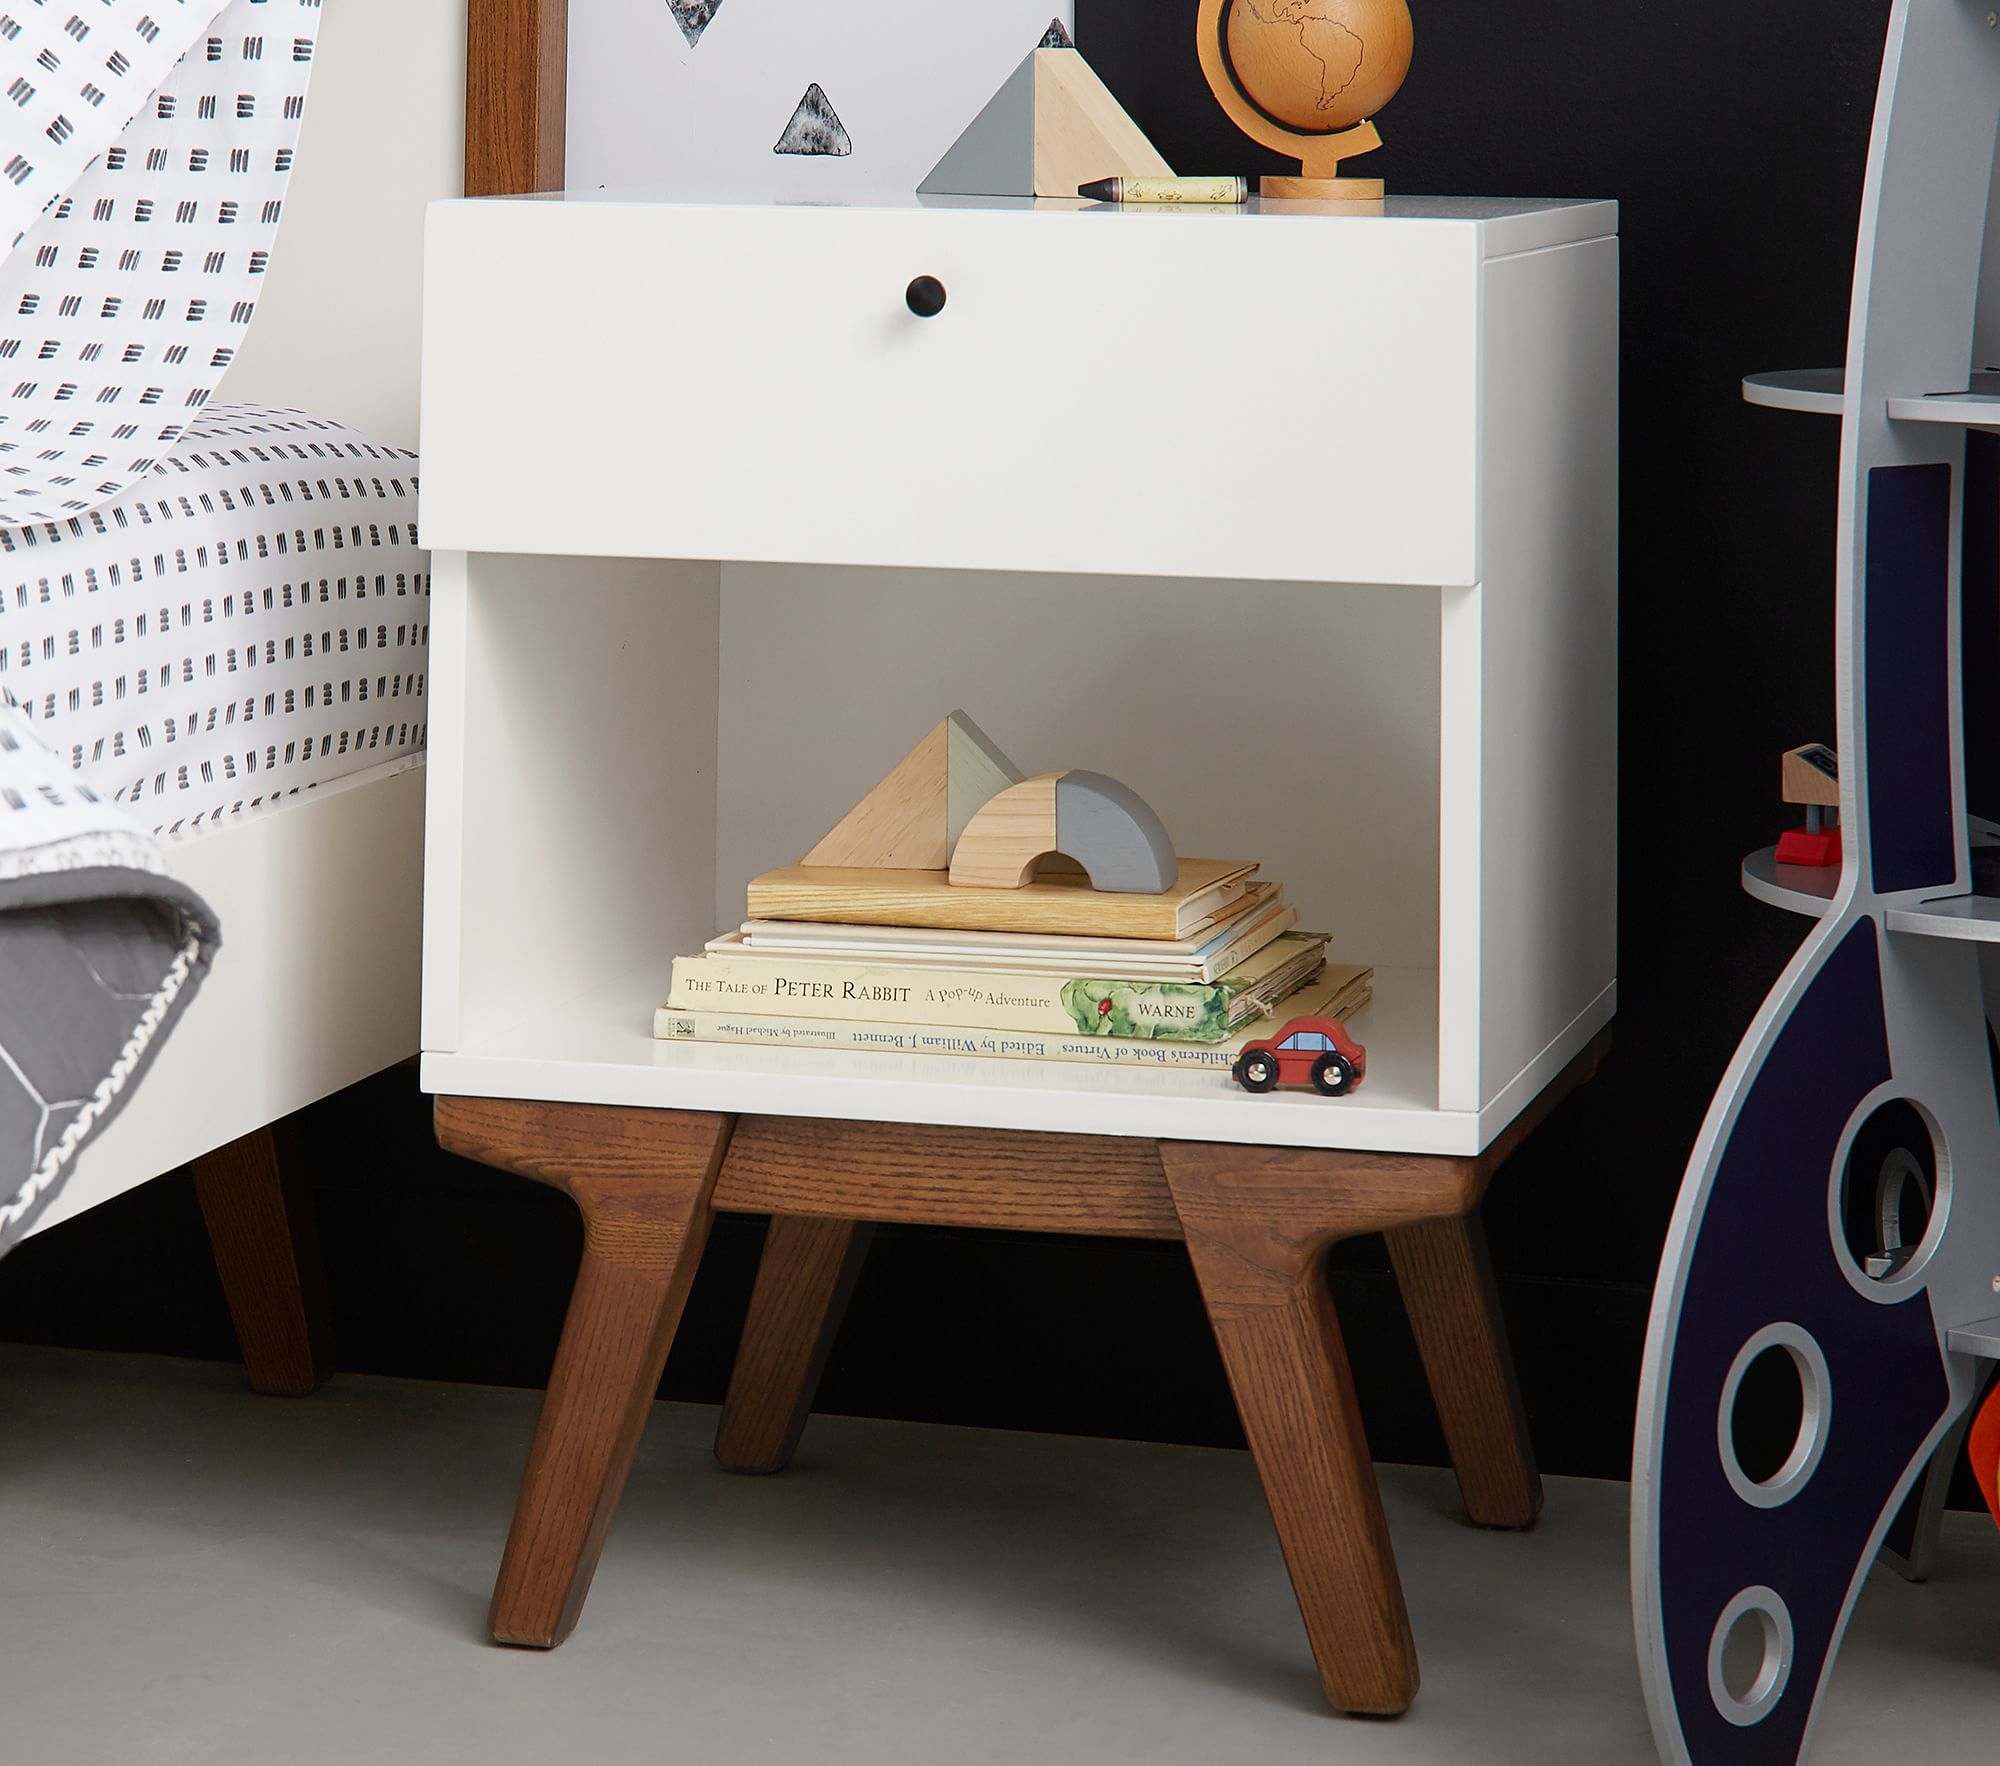 west elm x pbk Modern Nightstand, White Lacquer - Image 2